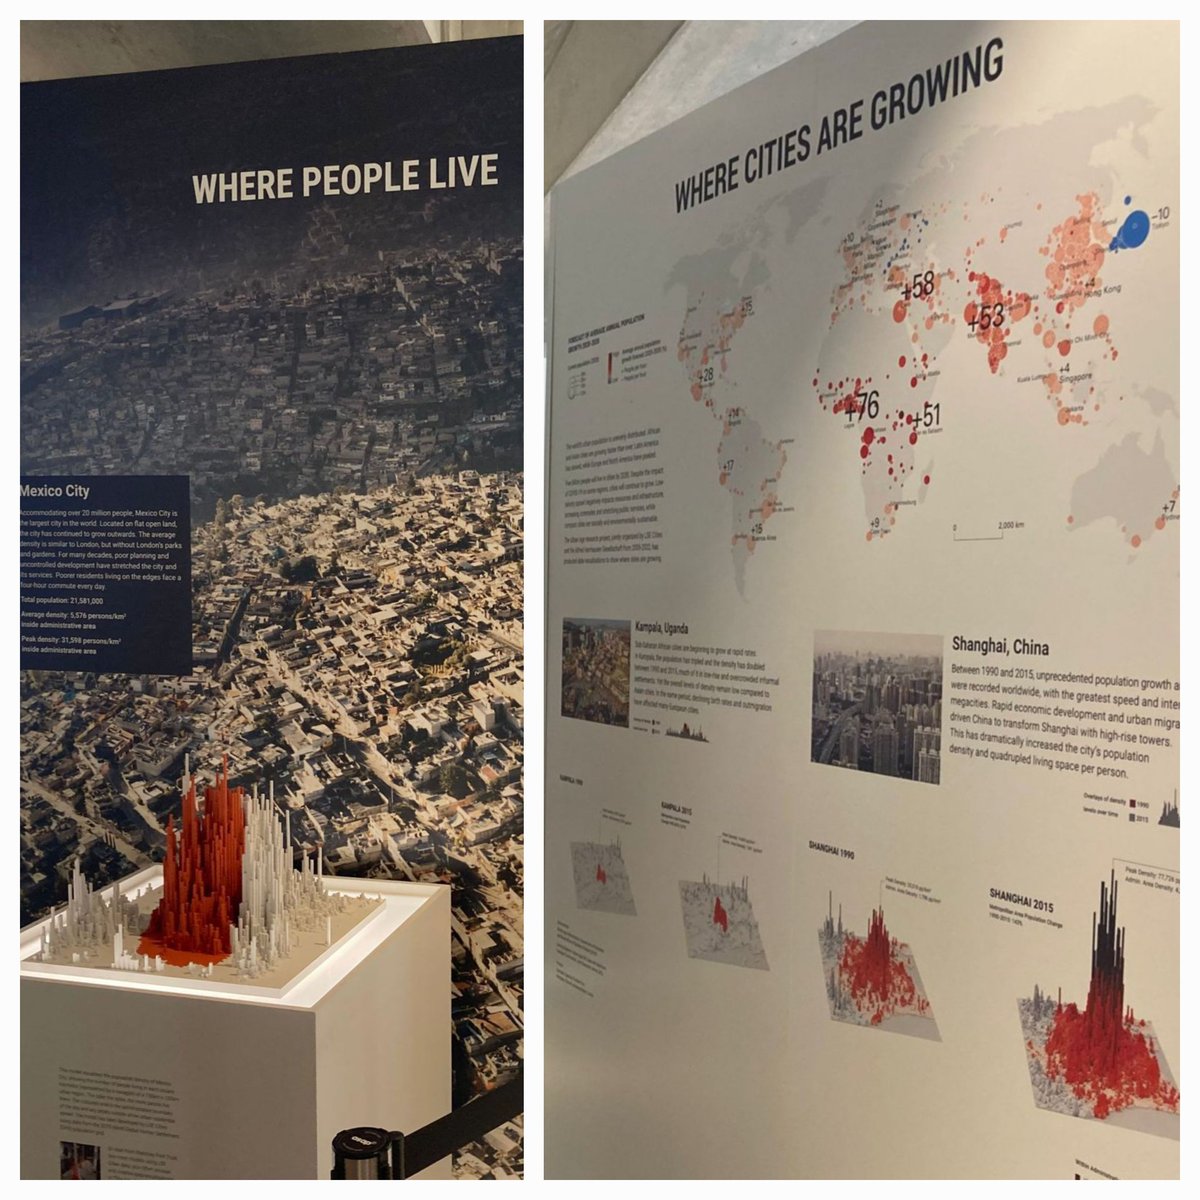 Visit the Mapping People and Change exhibition at #LSE to see a wide variety of maps and research, including some of @LSECities' Urban Age work. Thank you, @rebeccaflynnn, for the photos. #LSEFestival